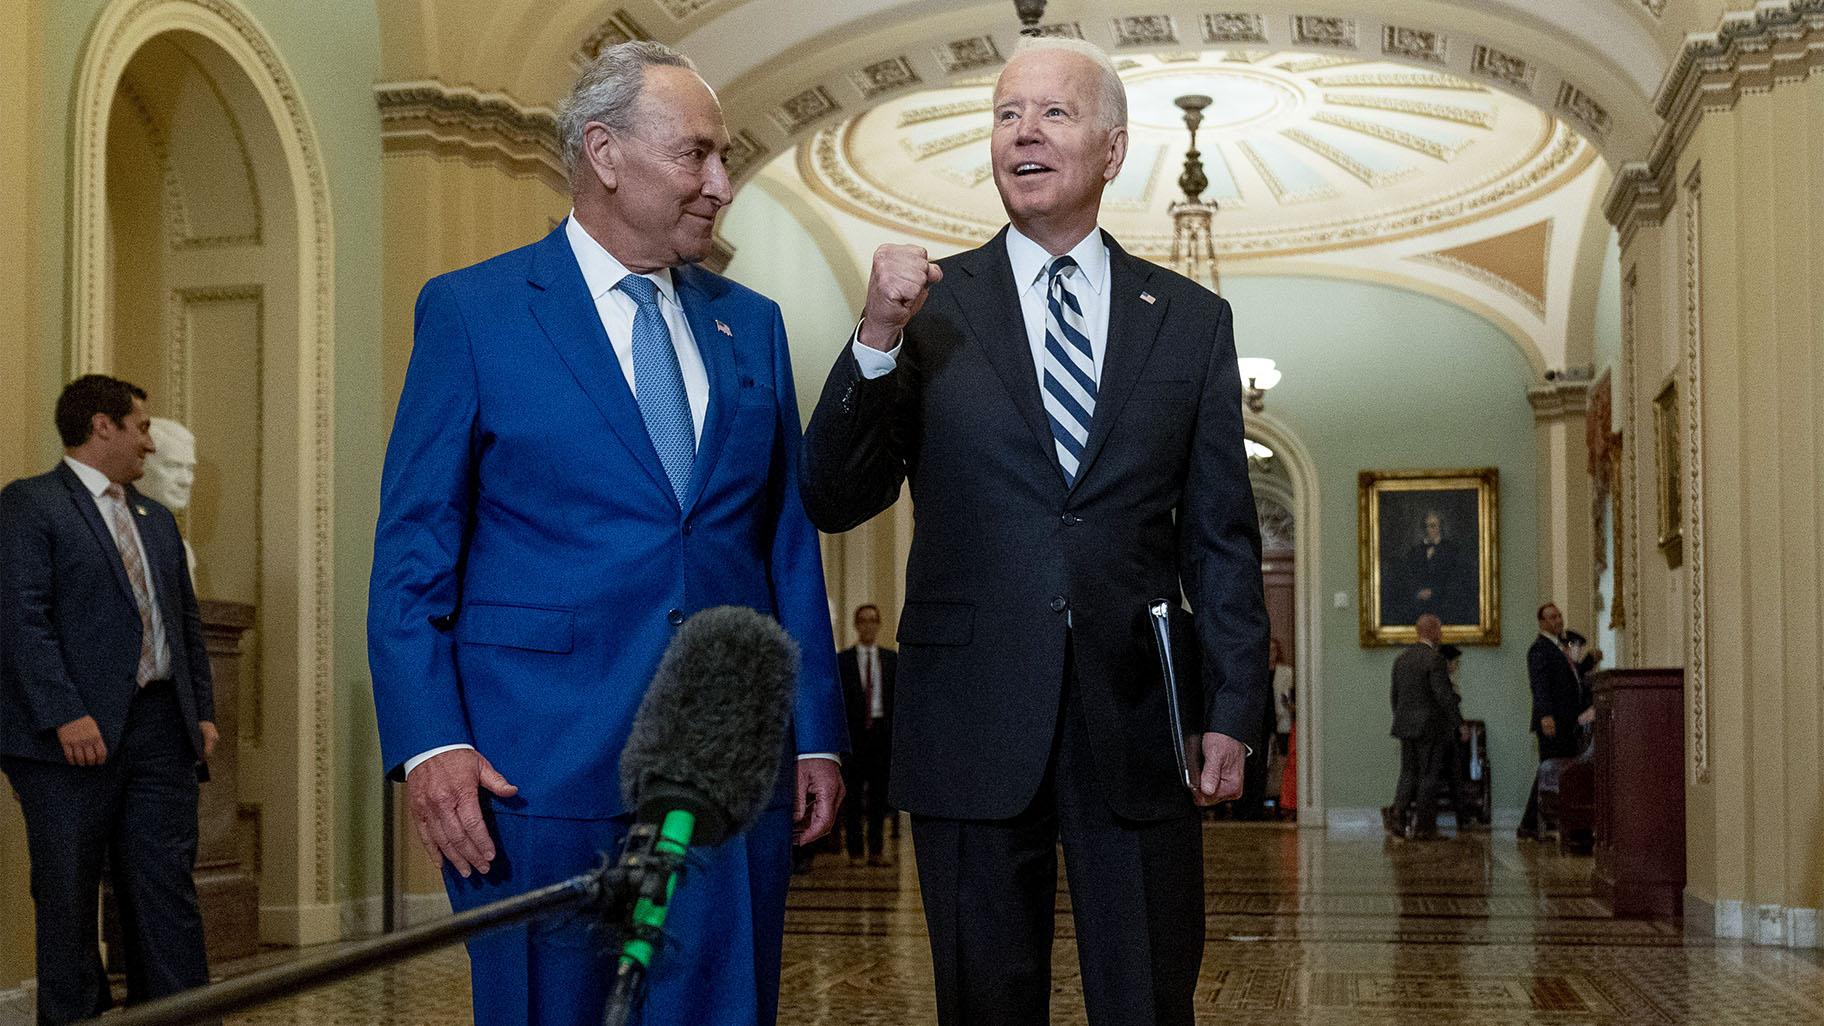 President Joe Biden joins Senate Majority Leader Chuck Schumer, D-N.Y., and fellow Democrats at the Capitol in Washington, Wednesday, July 14, 2021, to discuss the latest progress on his infrastructure agenda. (AP Photo / Andrew Harnik)